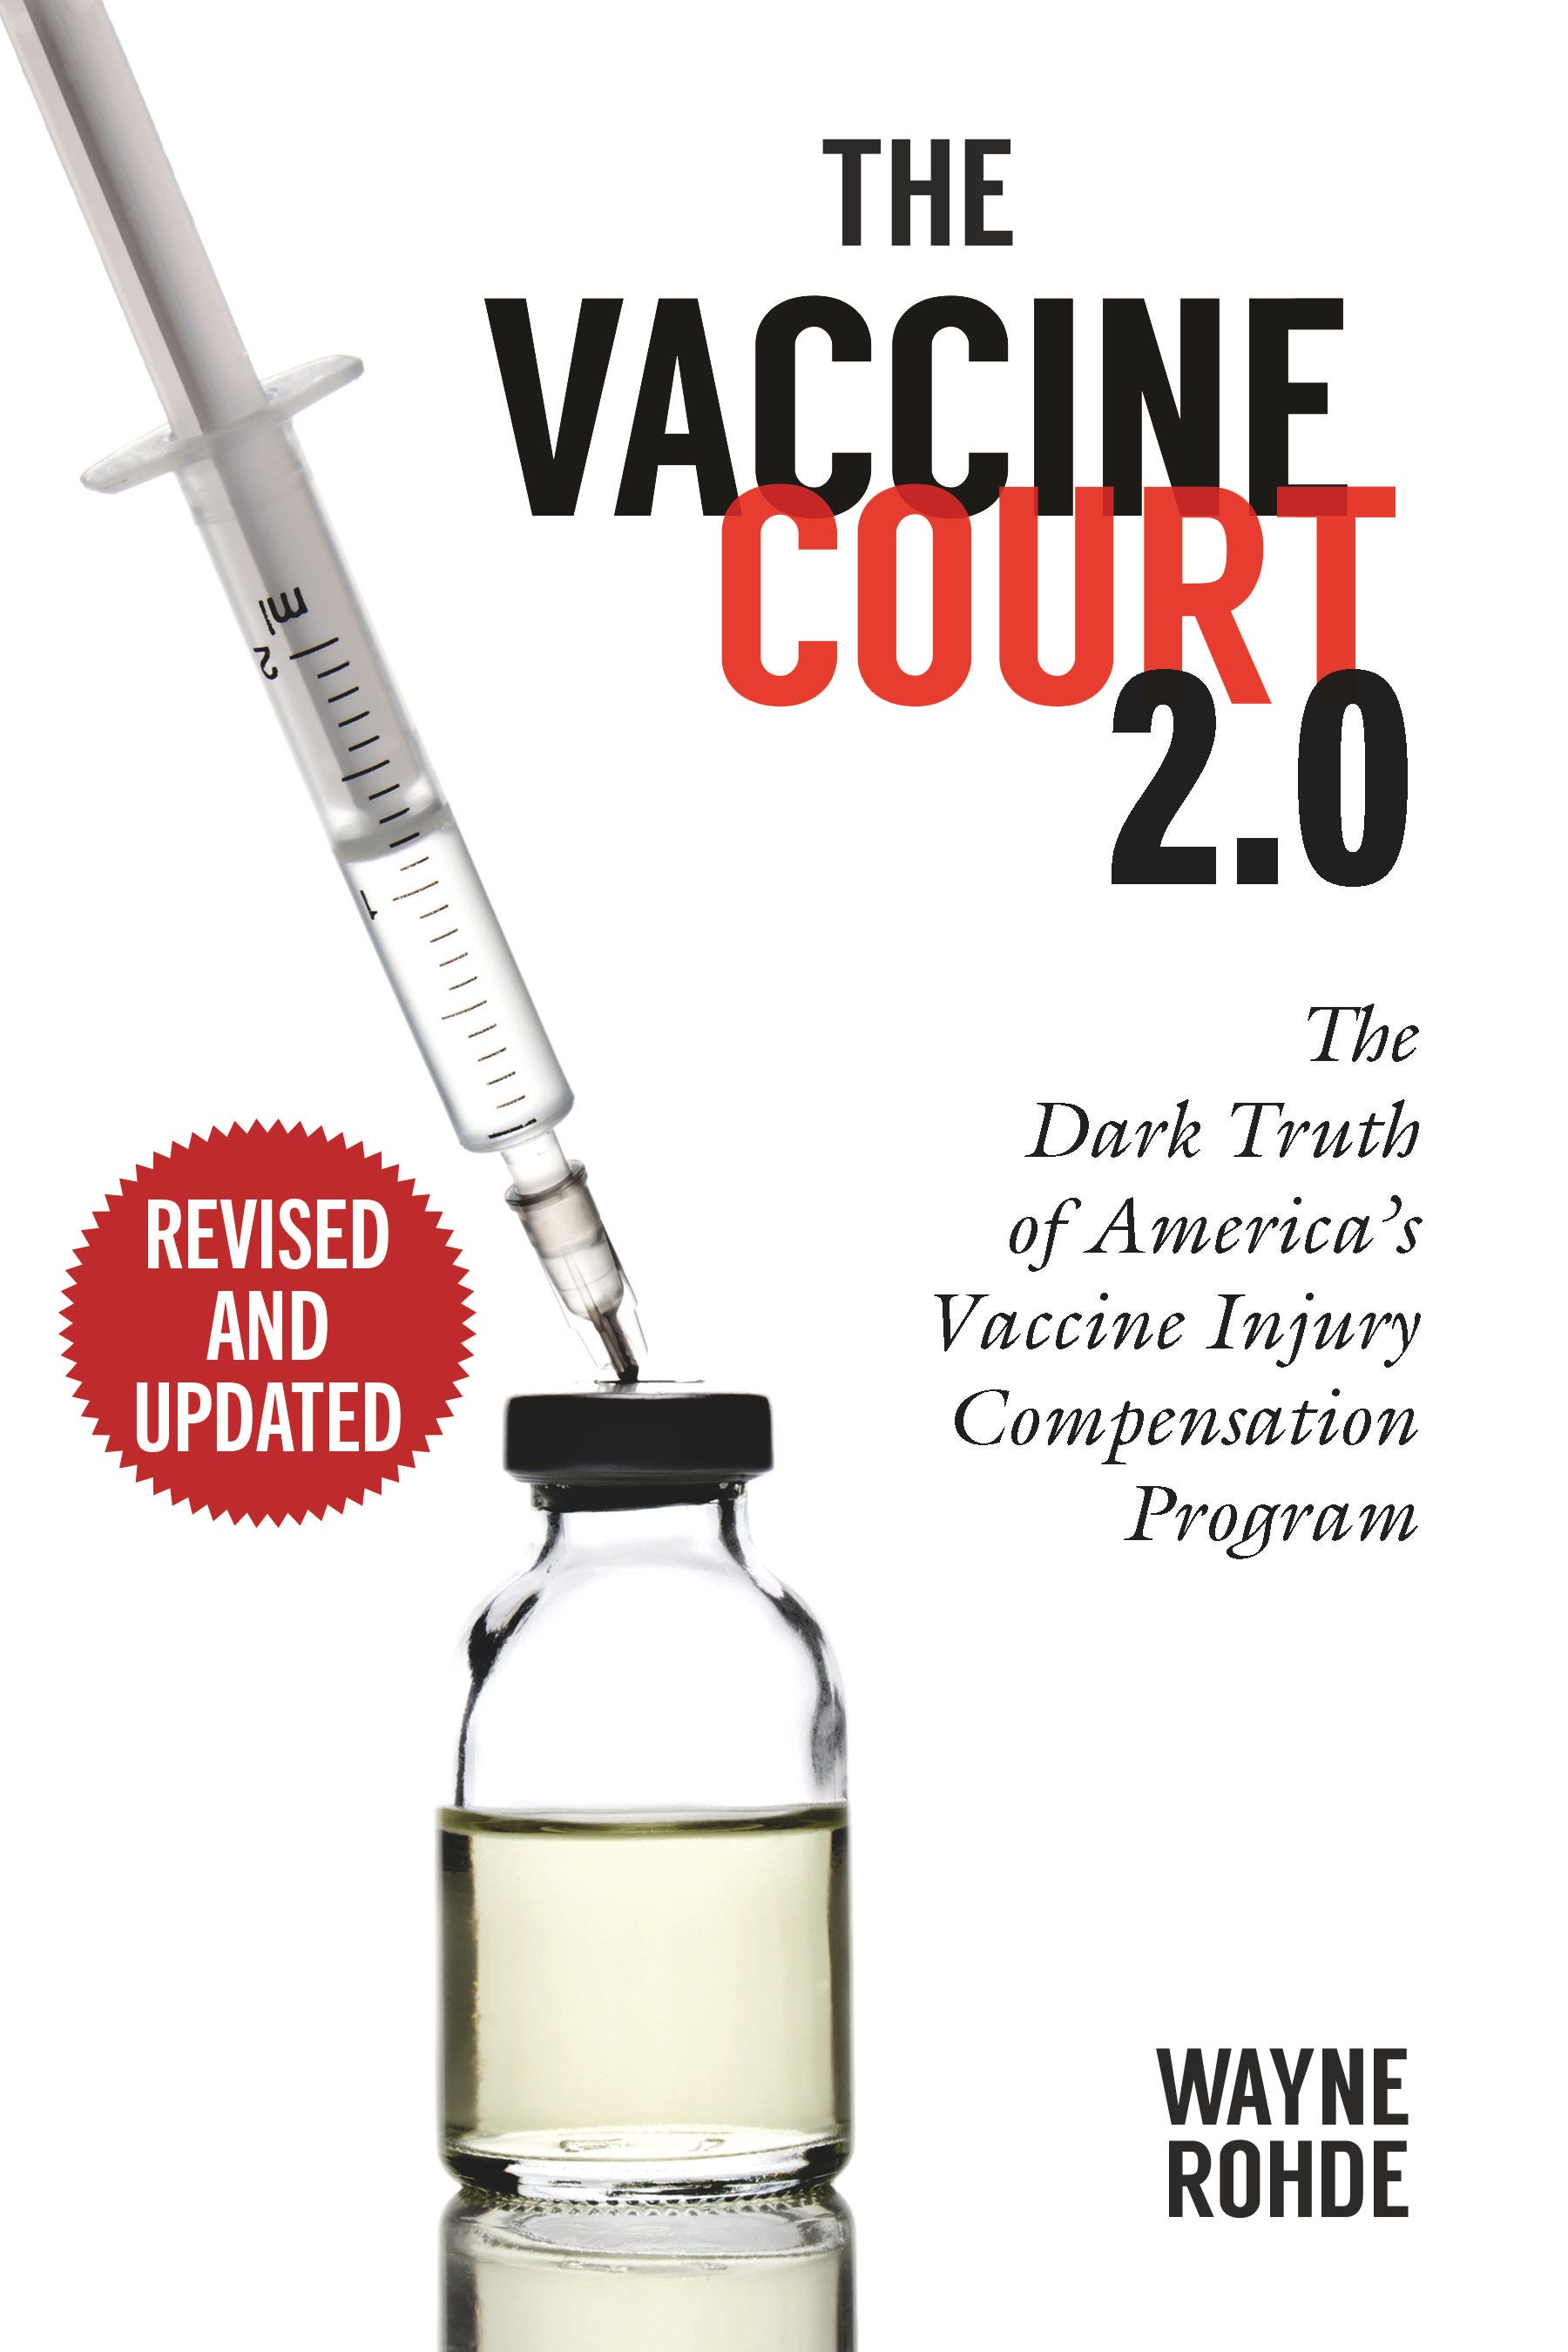 Artwork for The Vaccine Court